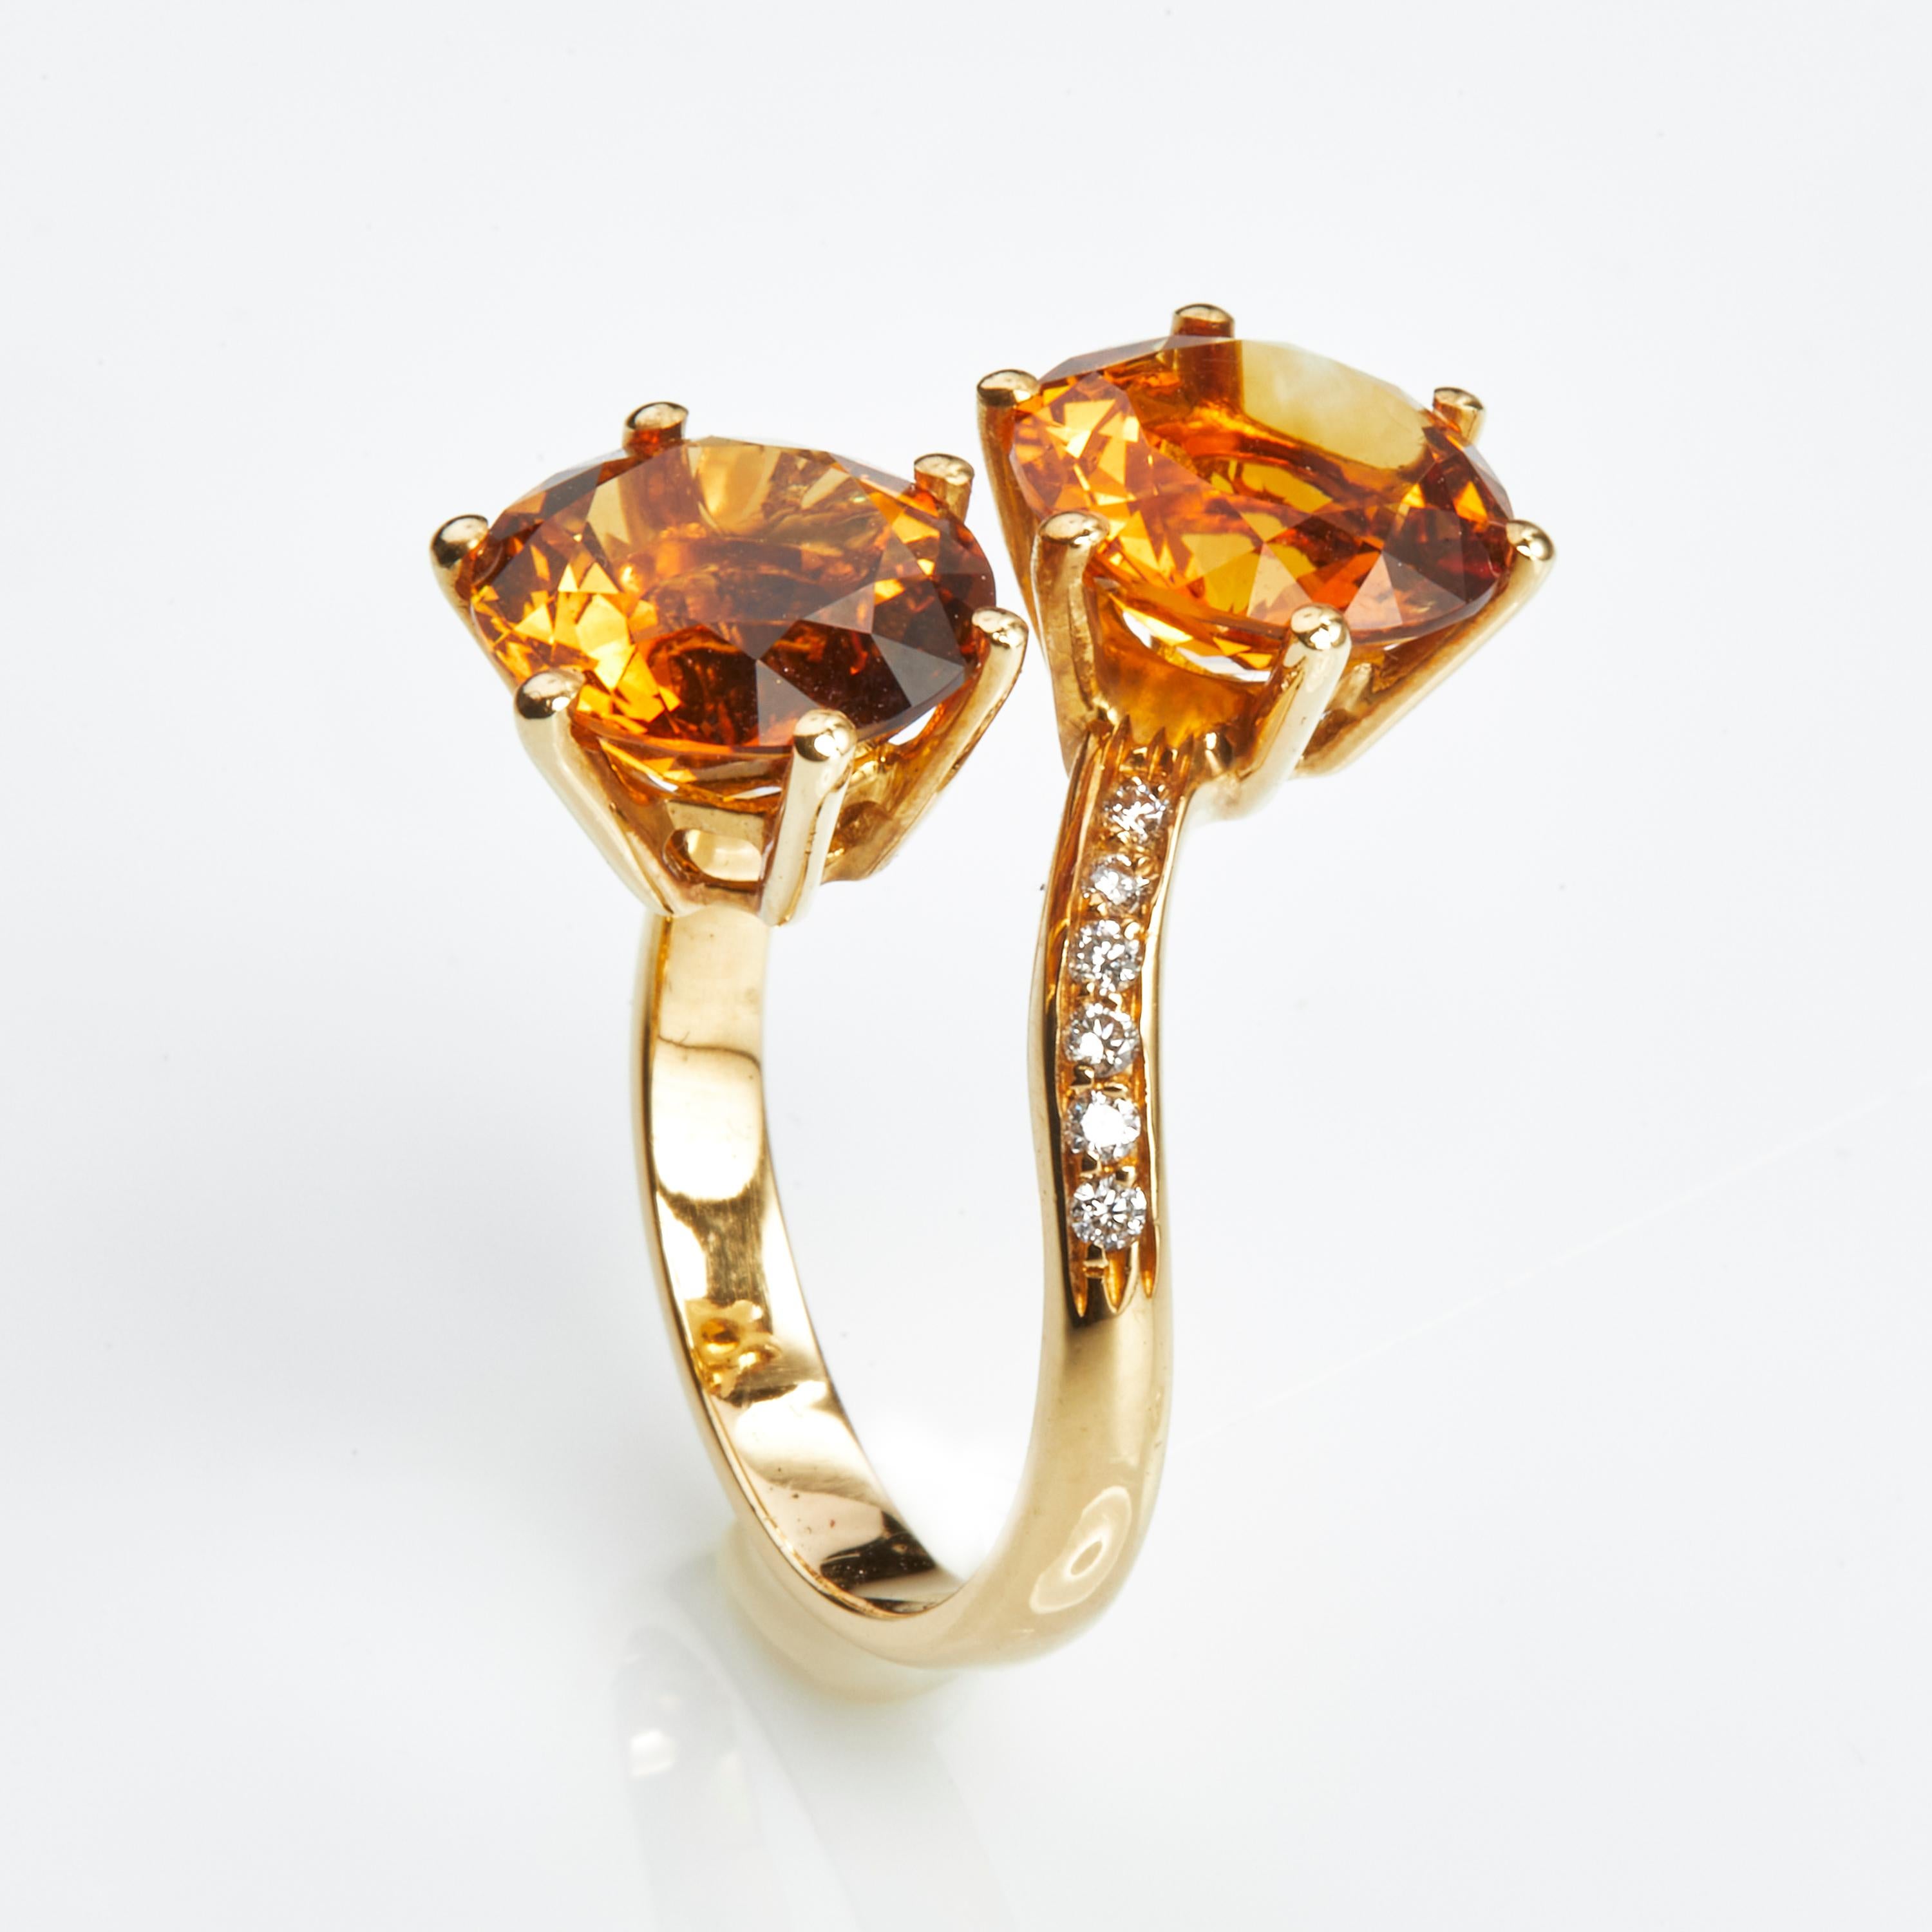 18 Karat Yellow Gold Diamond and CitrineCoktail Ring
12 Diamonds 0.15 Carat
2 Citrines 5.85 Carat

Size 55 US 7.2

Founded in 1974, Gianni Lazzaro is a family-owned jewelery company based out of Düsseldorf, Germany.
Although rooted in Germany,